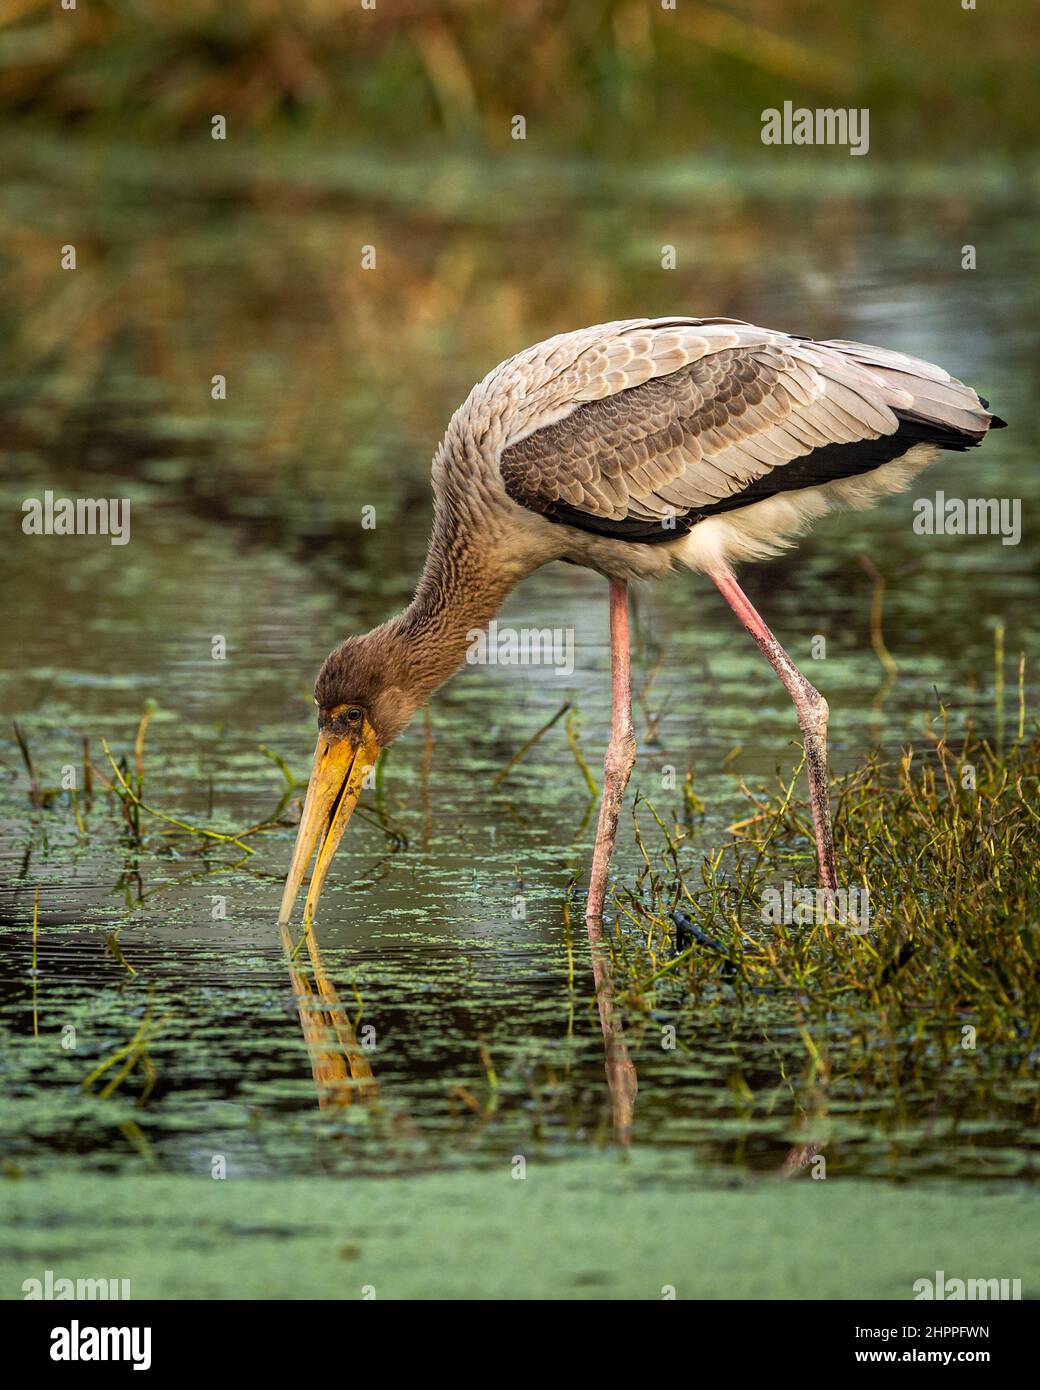 painted storks or Mycteria leucocephala juvenile bird portrait or closeup with reflection in water in colorful scenic background at keoladeo bharatpur Stock Photo